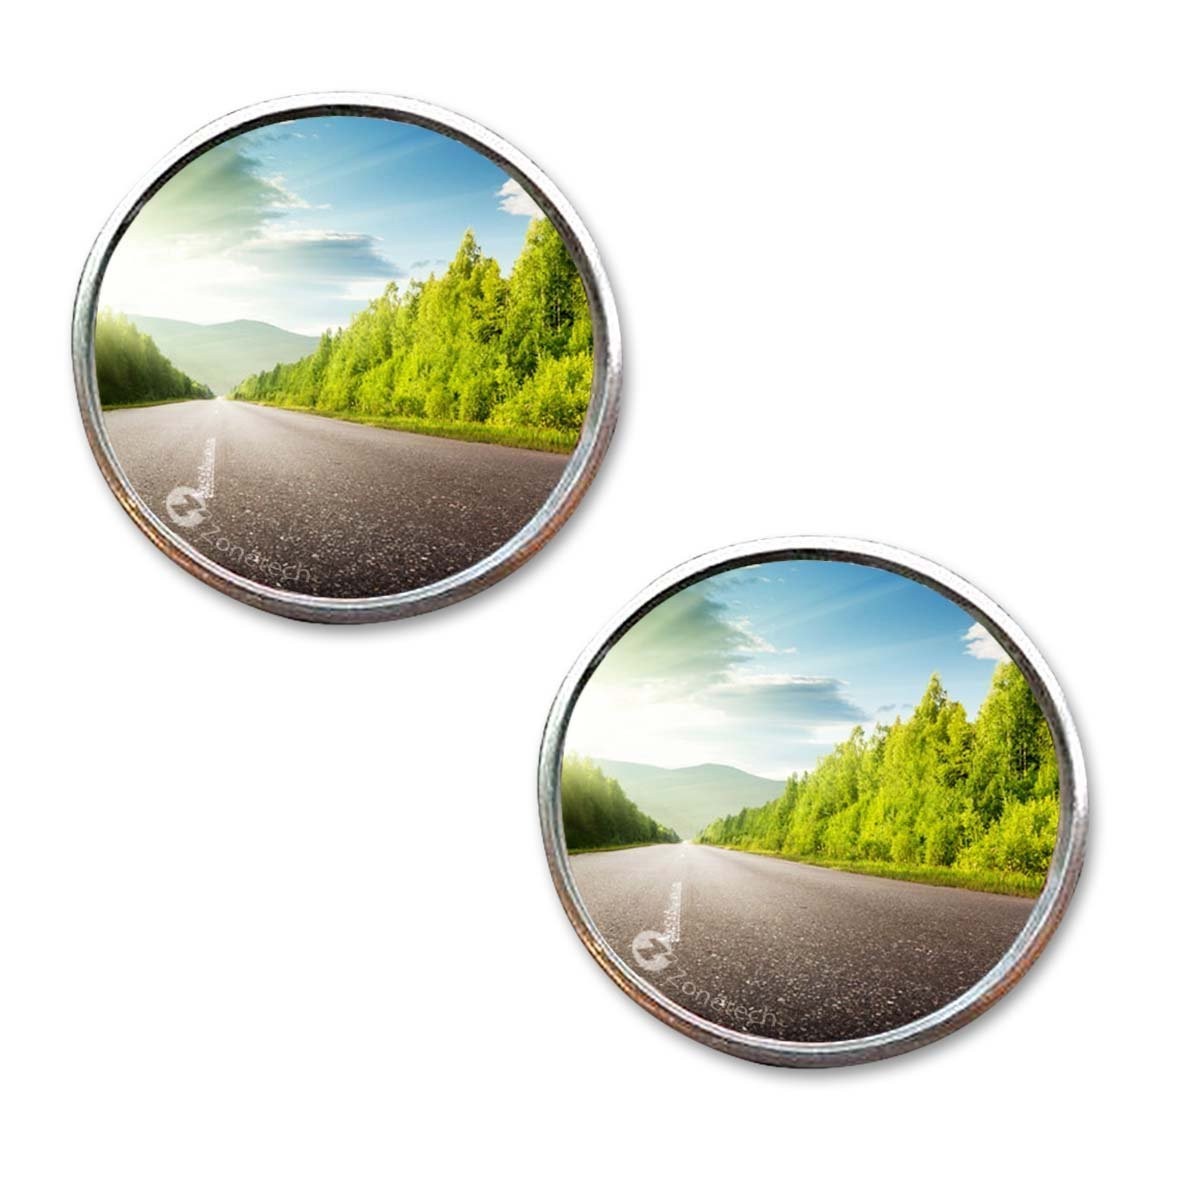 Car Round Blind Spot Mirror-Zone Tech Thin Universal Fit-2 inch Stick on SUV- Rearview Aluminum Border Vehicle Mirrors